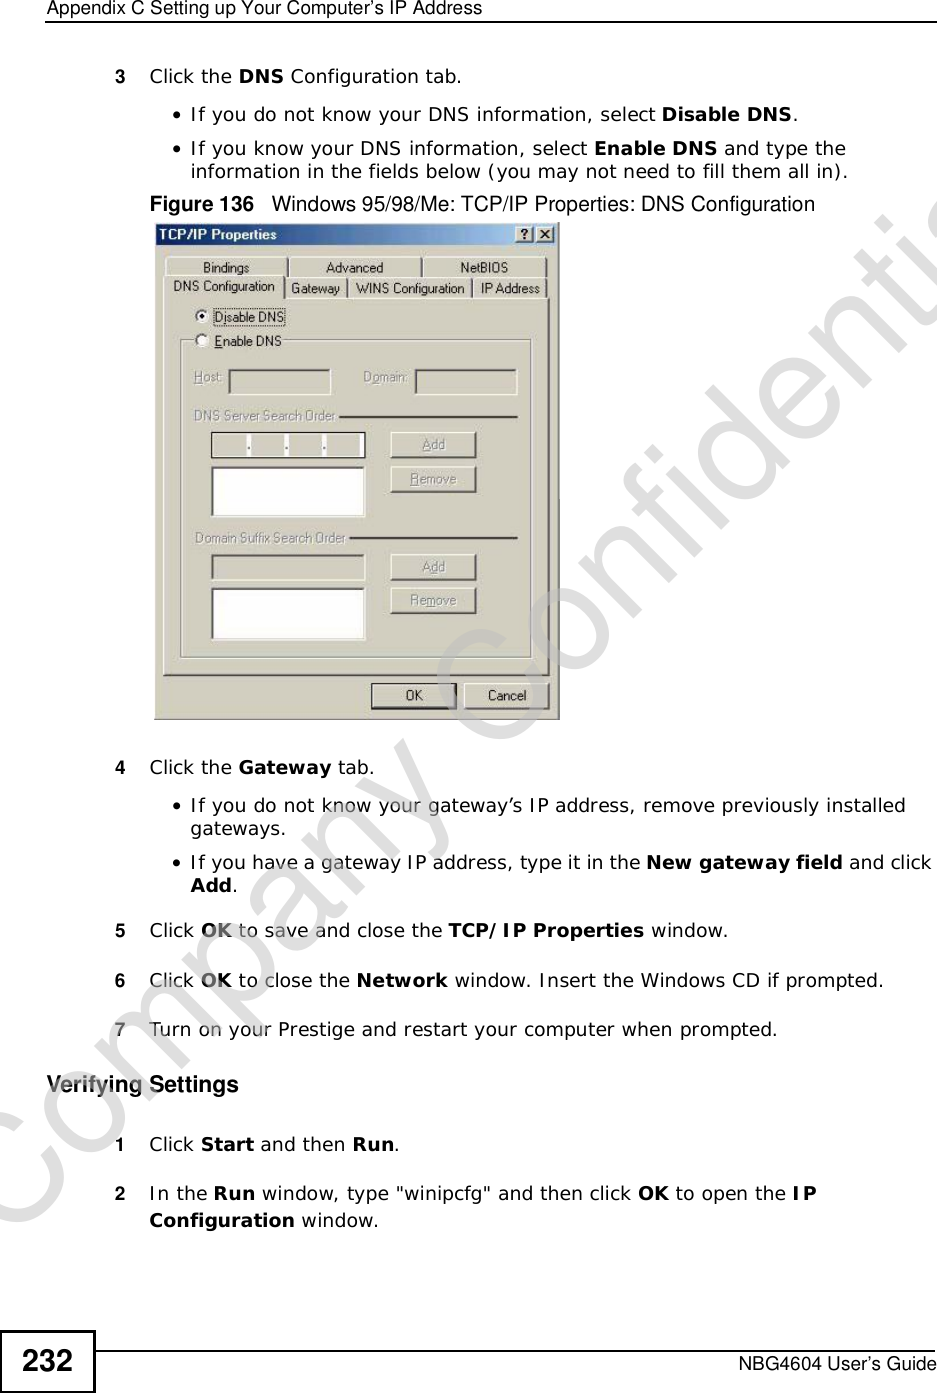 Appendix CSetting up Your Computer’s IP AddressNBG4604 User’s Guide2323Click the DNS Configuration tab.•If you do not know your DNS information, select Disable DNS.•If you know your DNS information, select Enable DNS and type the information in the fields below (you may not need to fill them all in).Figure 136   Windows 95/98/Me: TCP/IP Properties: DNS Configuration4Click the Gateway tab.•If you do not know your gateway’s IP address, remove previously installed gateways.•If you have a gateway IP address, type it in the New gateway field and click Add.5Click OK to save and close the TCP/IP Properties window.6Click OK to close the Network window. Insert the Windows CD if prompted.7Turn on your Prestige and restart your computer when prompted.Verifying Settings1Click Start and then Run.2In the Run window, type &quot;winipcfg&quot; and then click OK to open the IPConfiguration window.Company Confidential